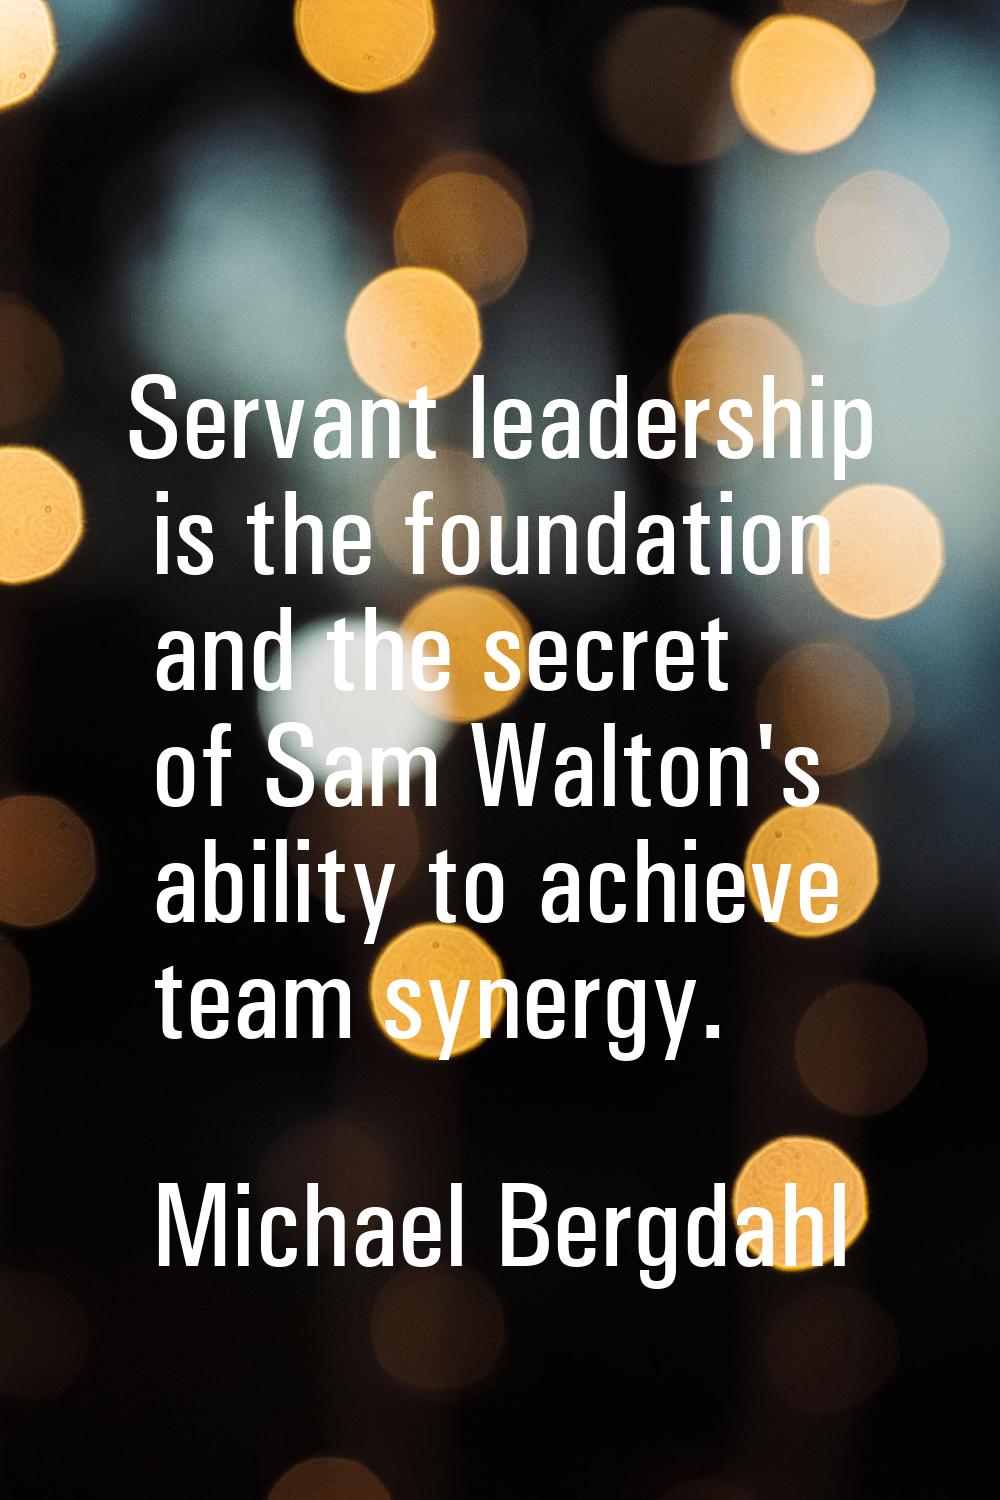 Servant leadership is the foundation and the secret of Sam Walton's ability to achieve team synergy